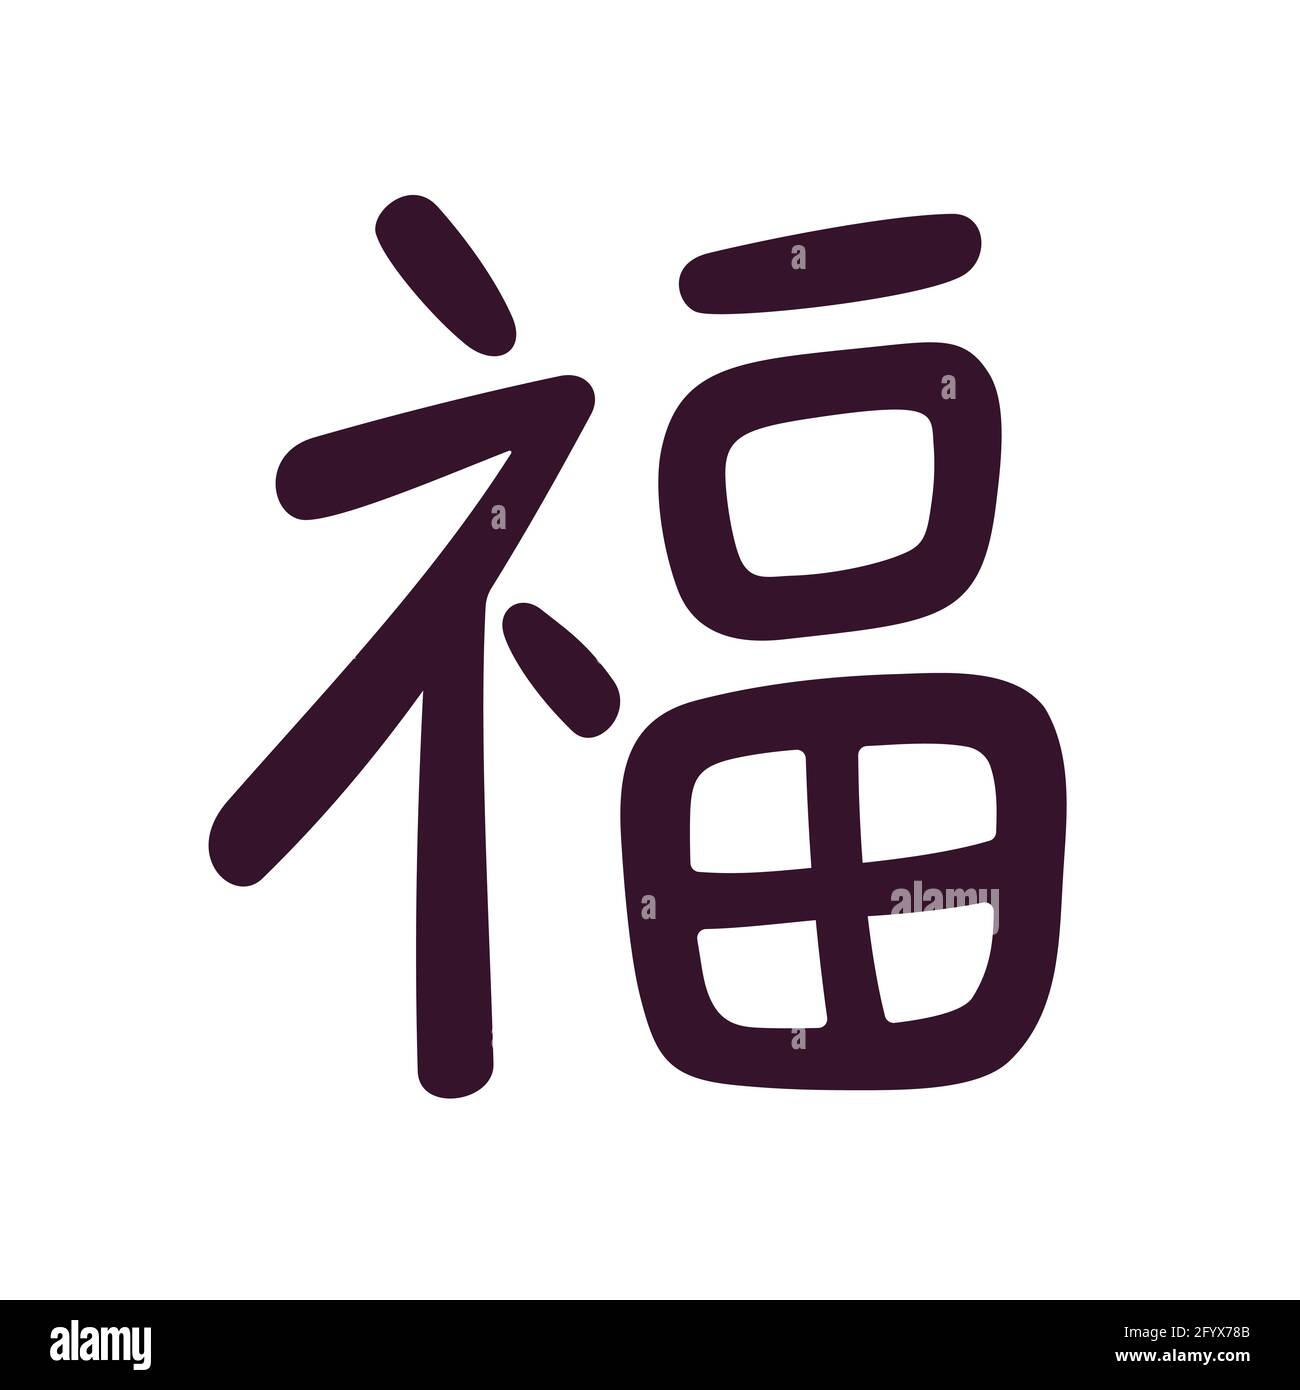 Chinese character 'Fu' that means 'fortune' or 'good luck'. Calligraphy handwriting symbol in simple modern style. Vector clip art illustration. Stock Vector